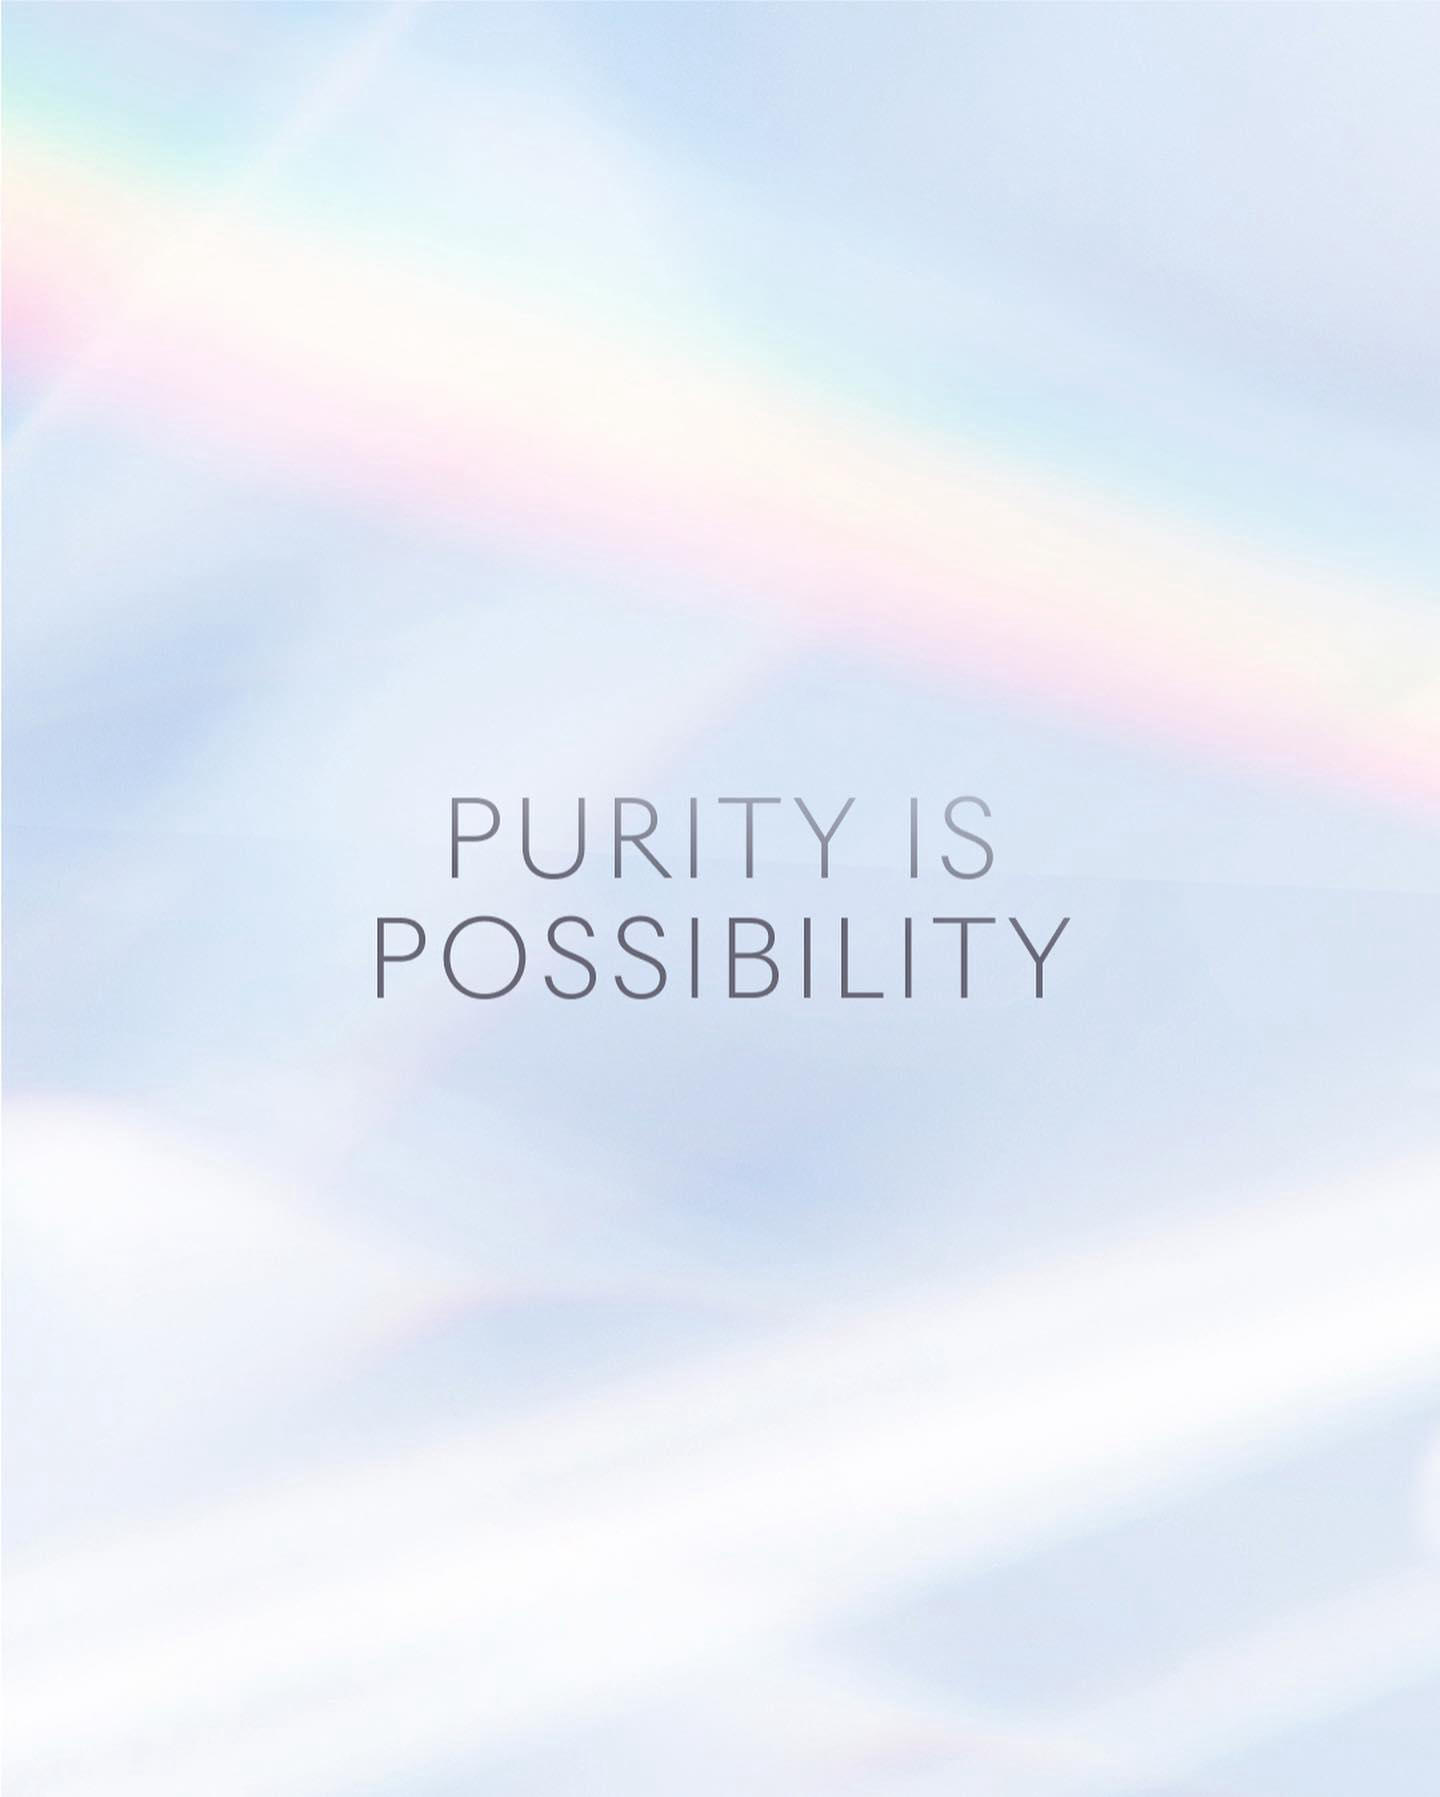 PURITY IS POSSIBILITYThrough limitless imagination, Ghost’s #Bespoke potential is boundless